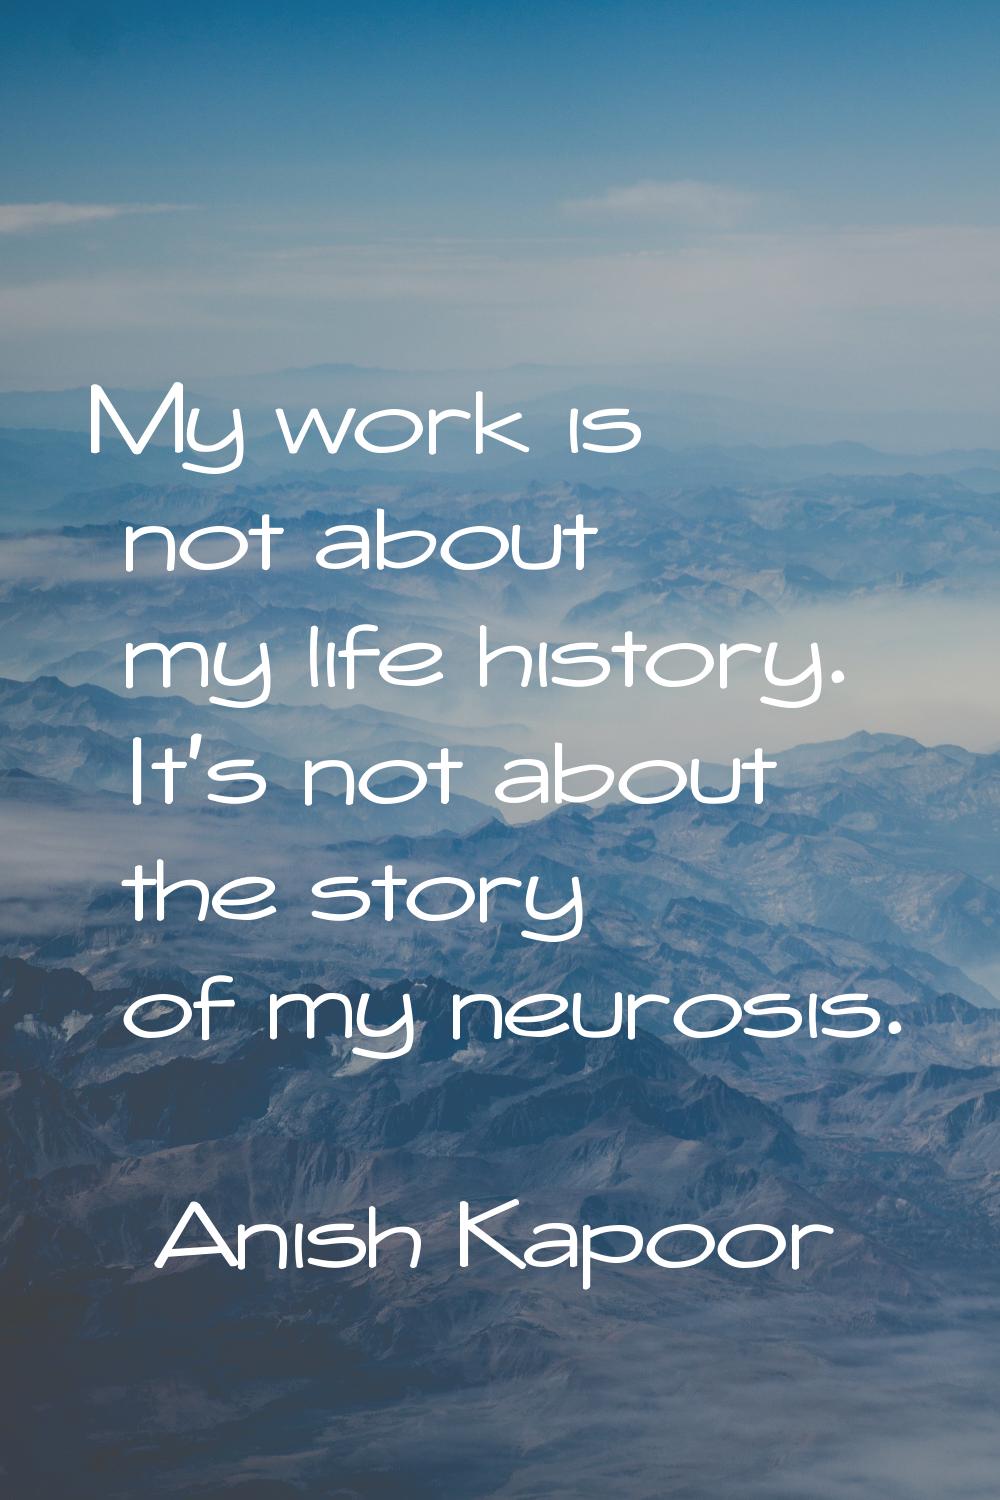 My work is not about my life history. It's not about the story of my neurosis.